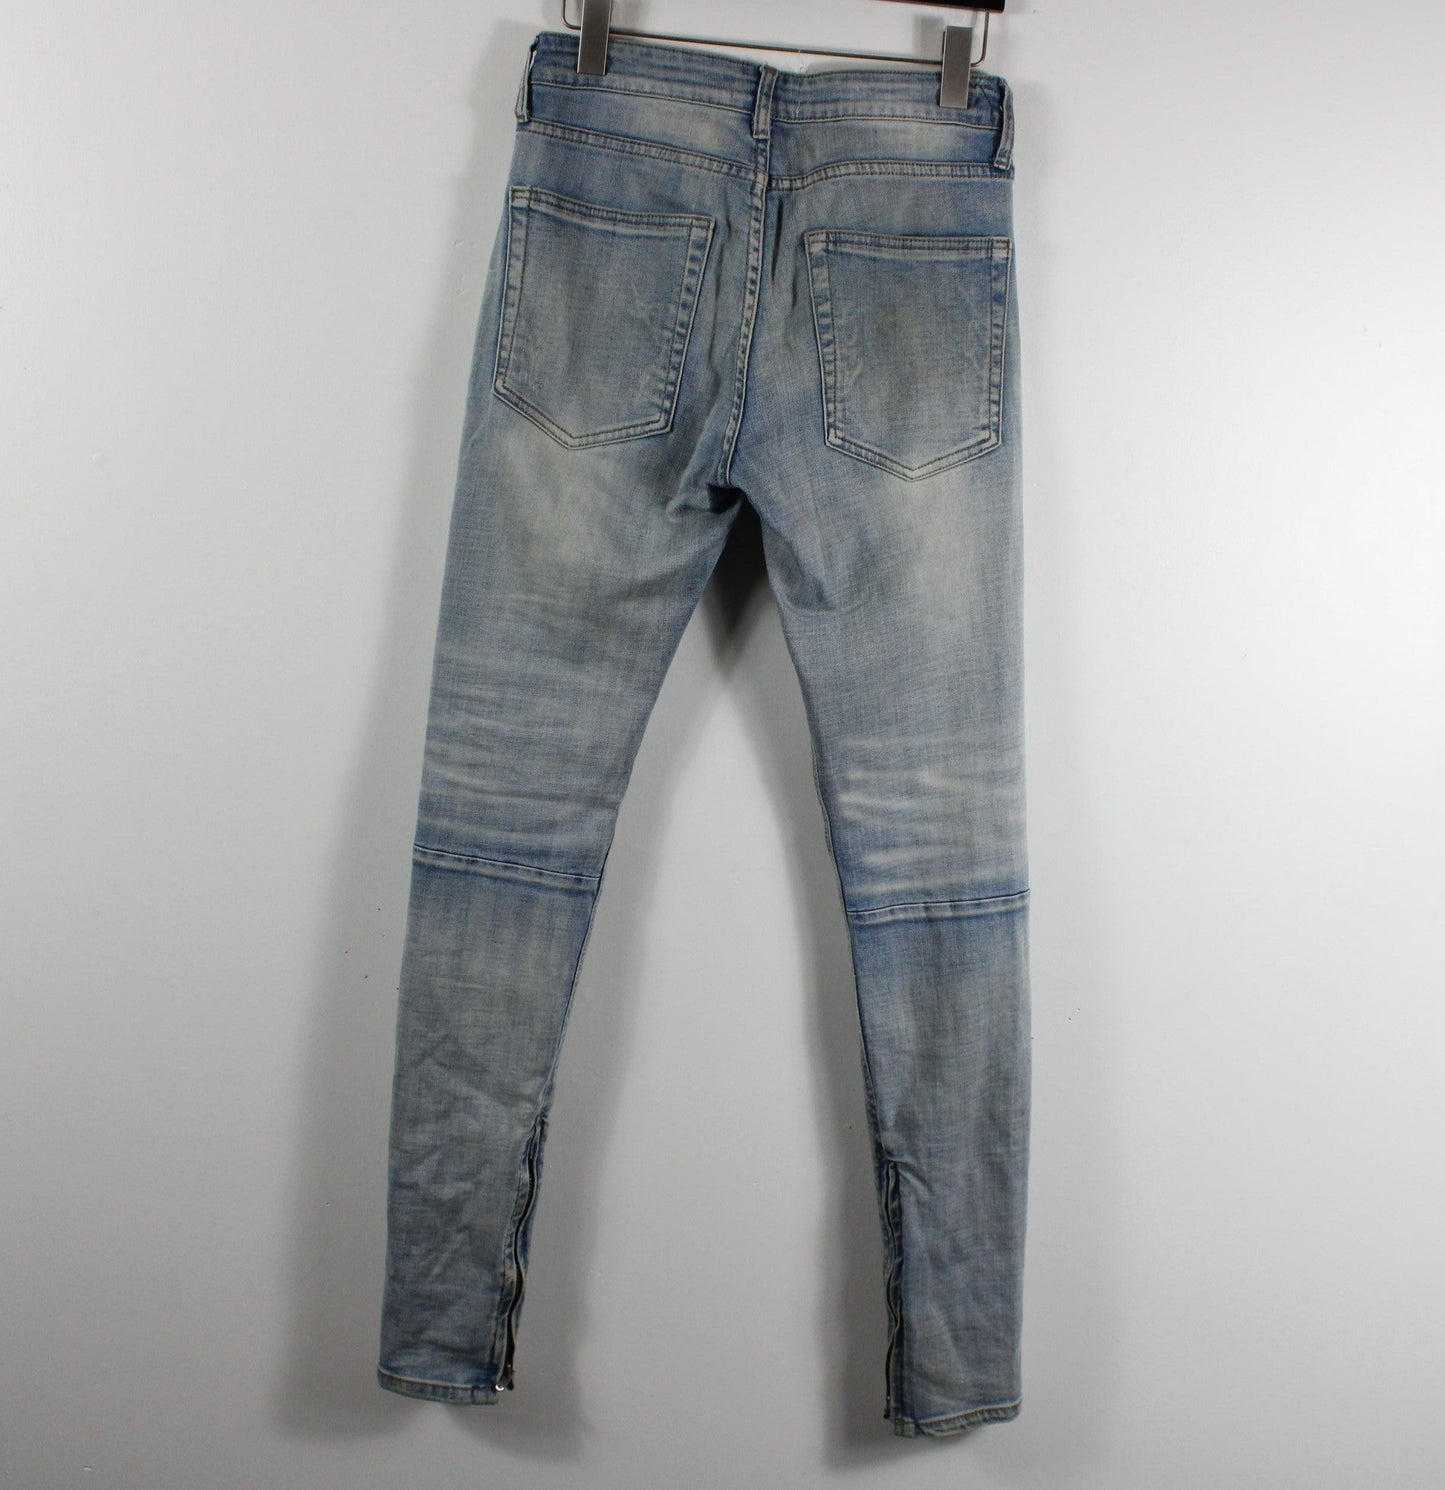 Fear of God Fourth Collection 2015-2016 Jeans